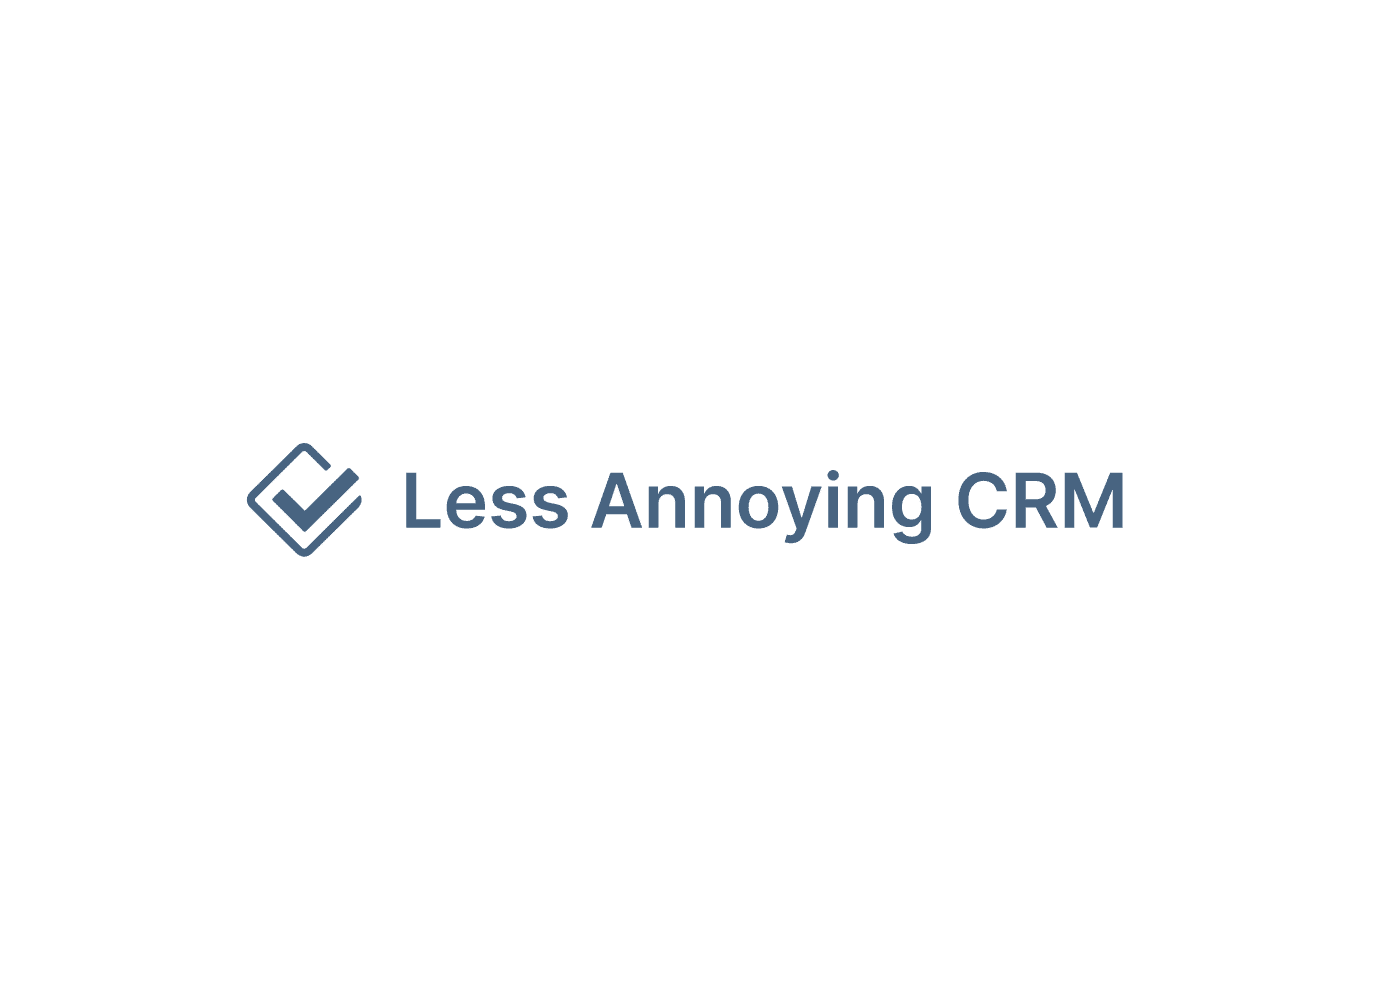 less annoying crm review logo